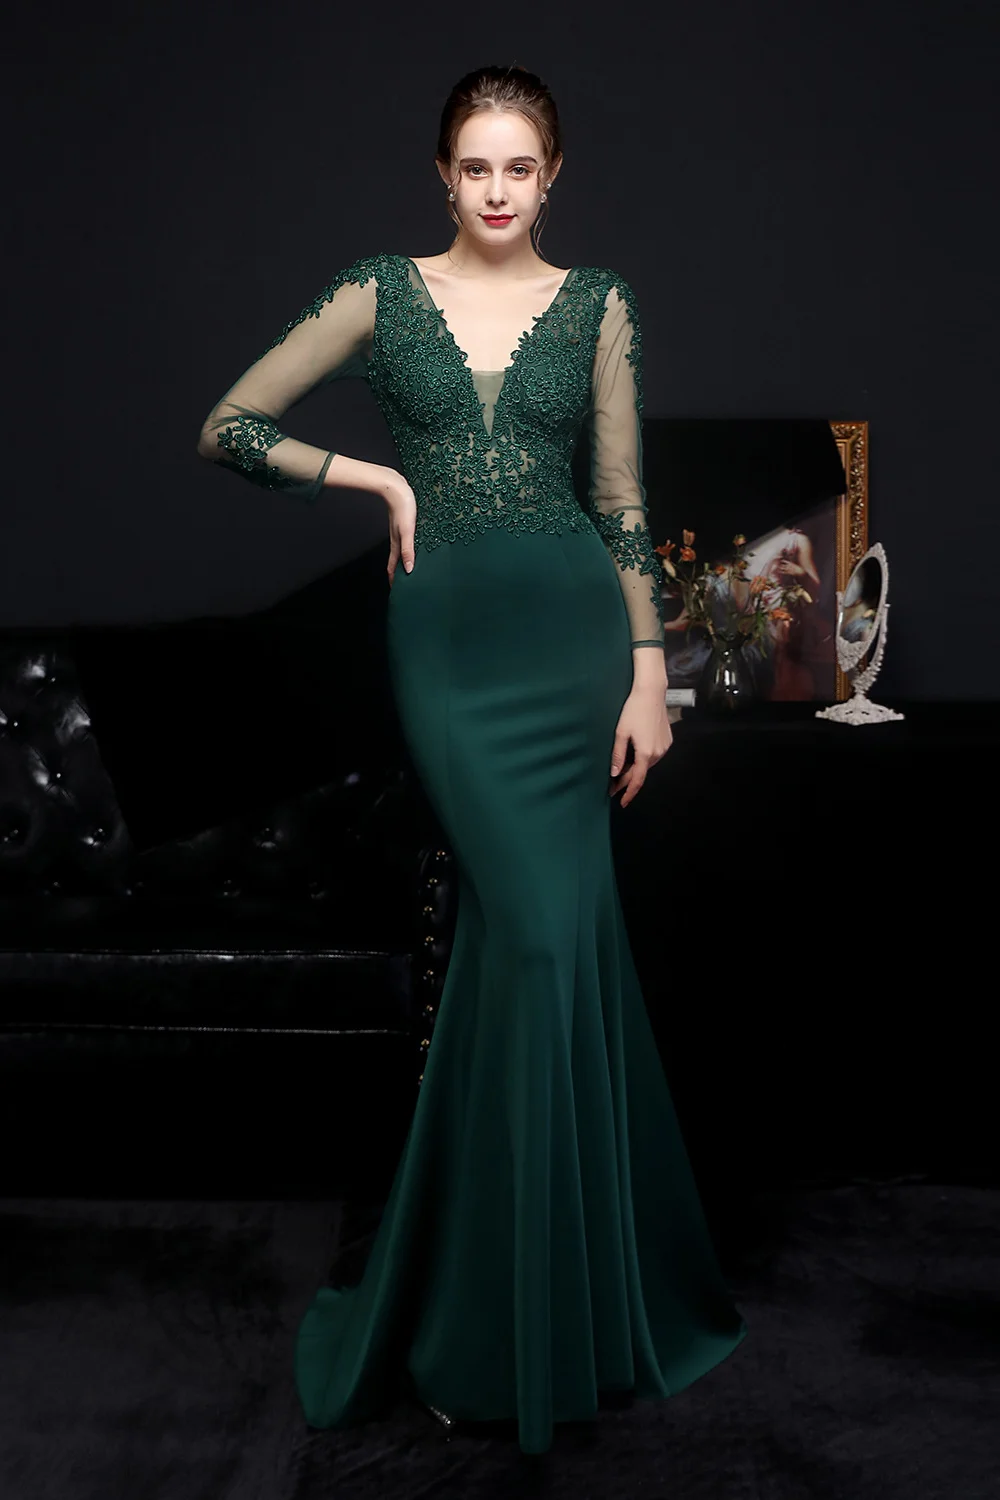 Affordable Long Sleeves Mermaid Evening Dress V-Neck With Lace Appliques YE0036 - lulusllly